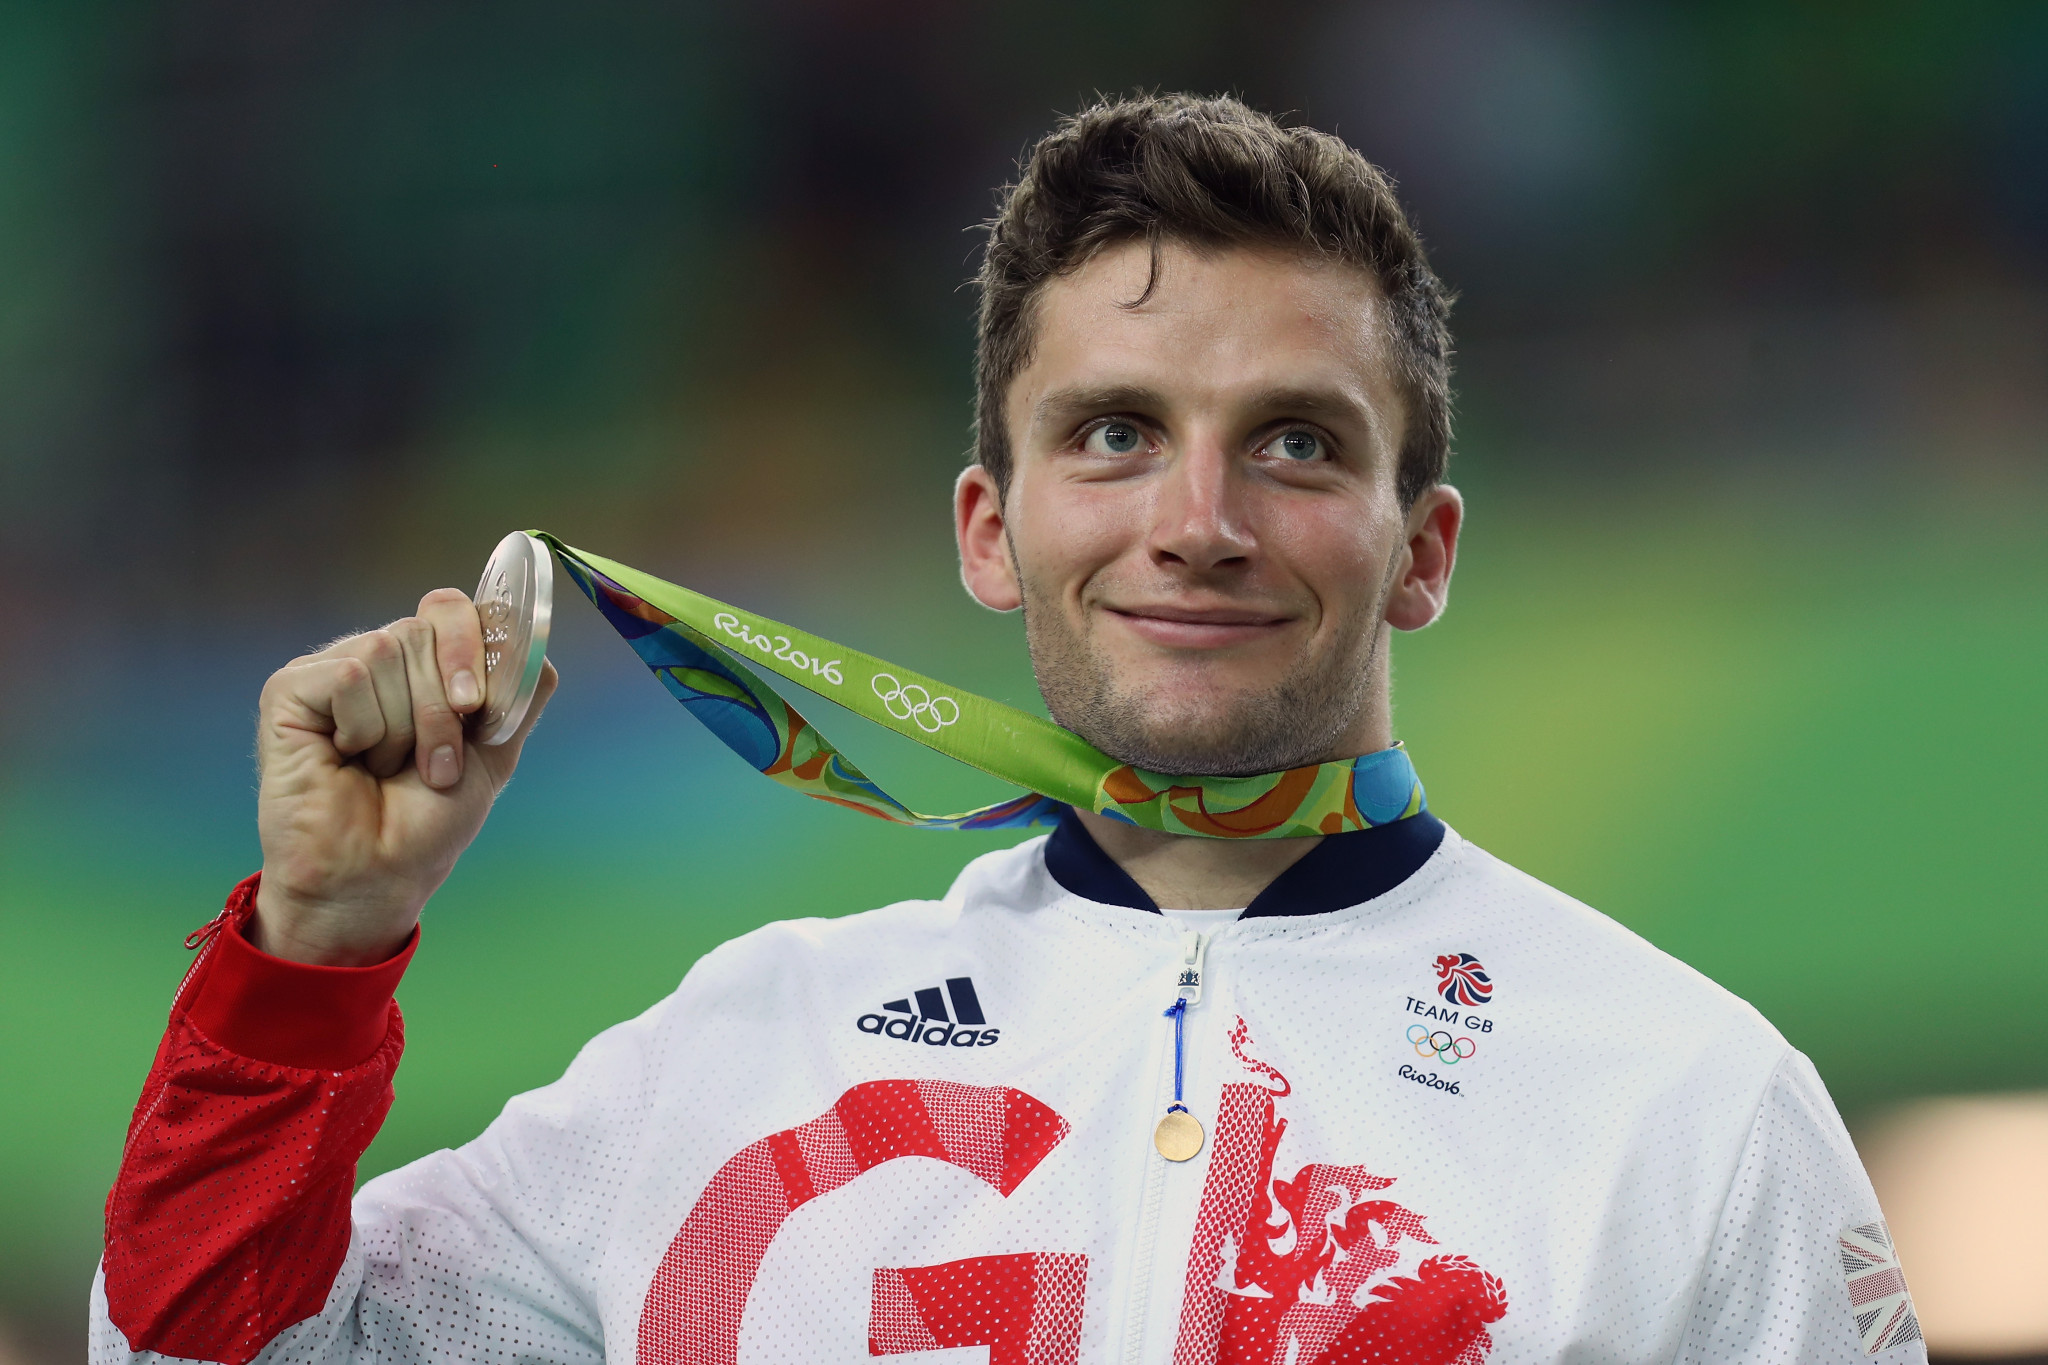 Callum Skinner, Olympic gold medalist and member of the UK Anti-Doping Athlete Committee, has backed a report which calls for a drastic reform of WADA's governance structures ©Getty Images